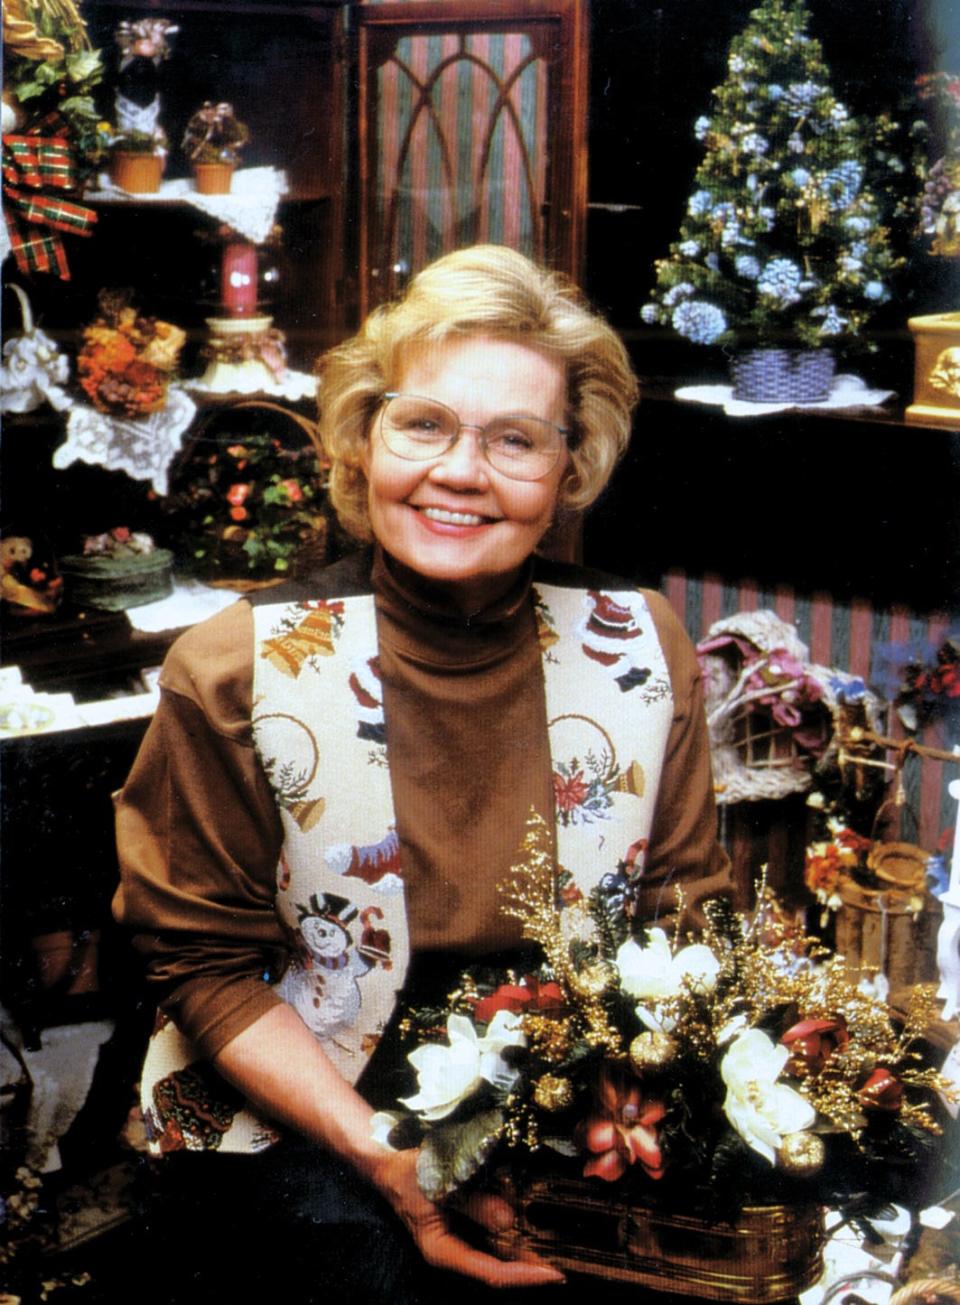 Crafting expert and beloved TV personality Carol Duvall passed away at 97 on July 31, 2023 in Traverse City, Michigan.